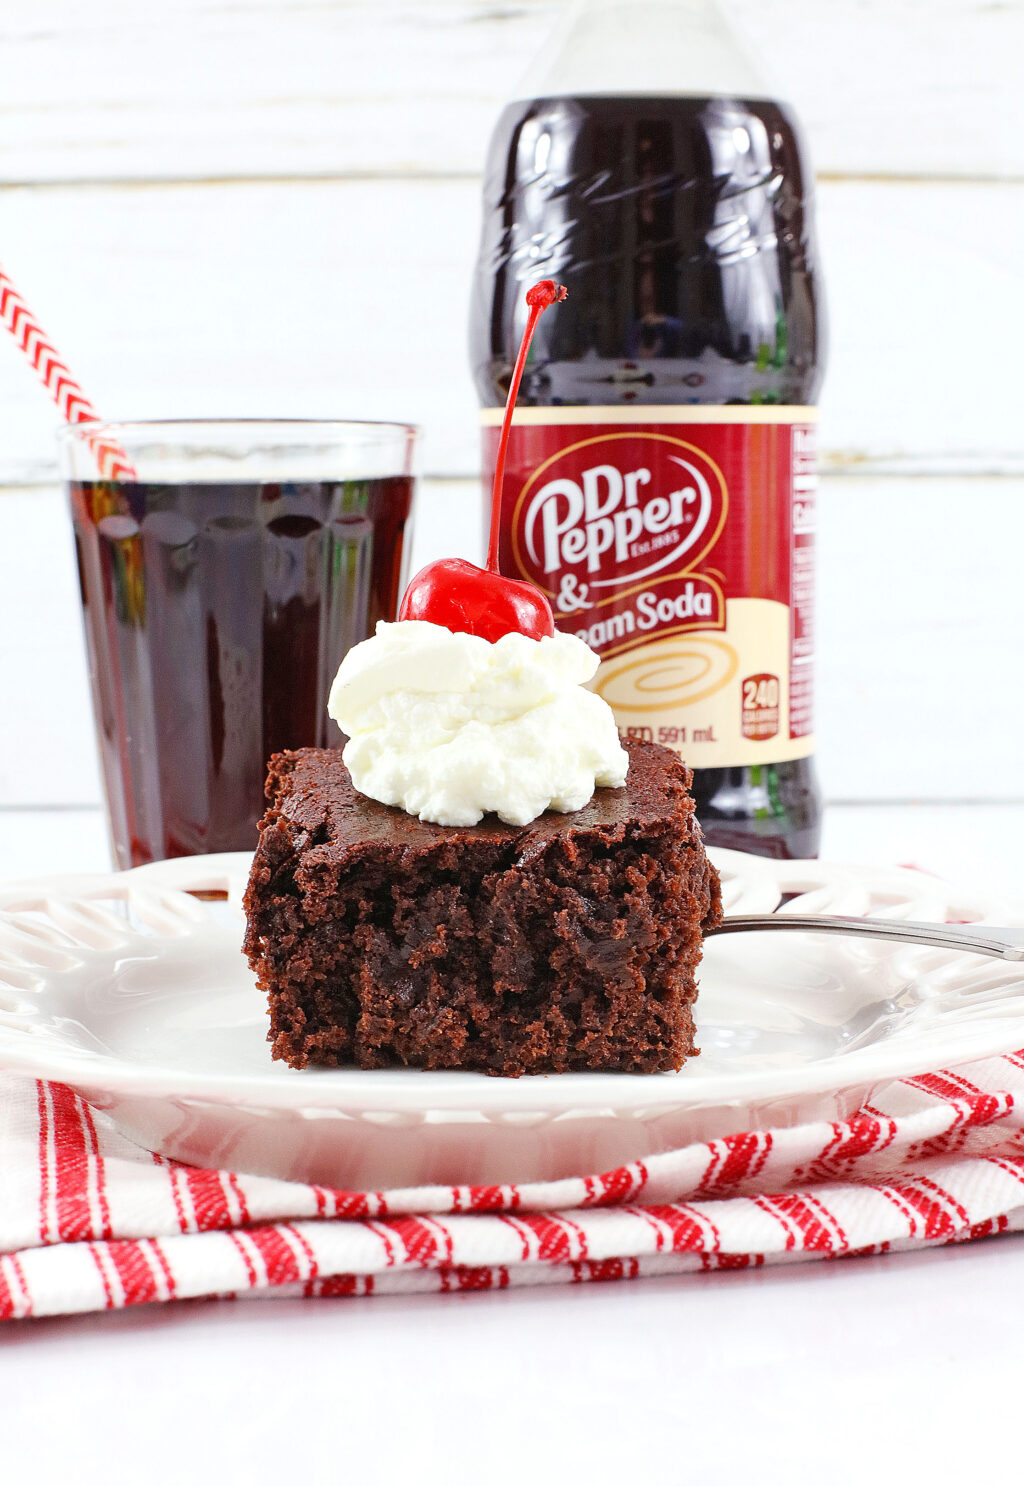 slice of dr. pepper cake on white plate with dr. pepper bottle behind it